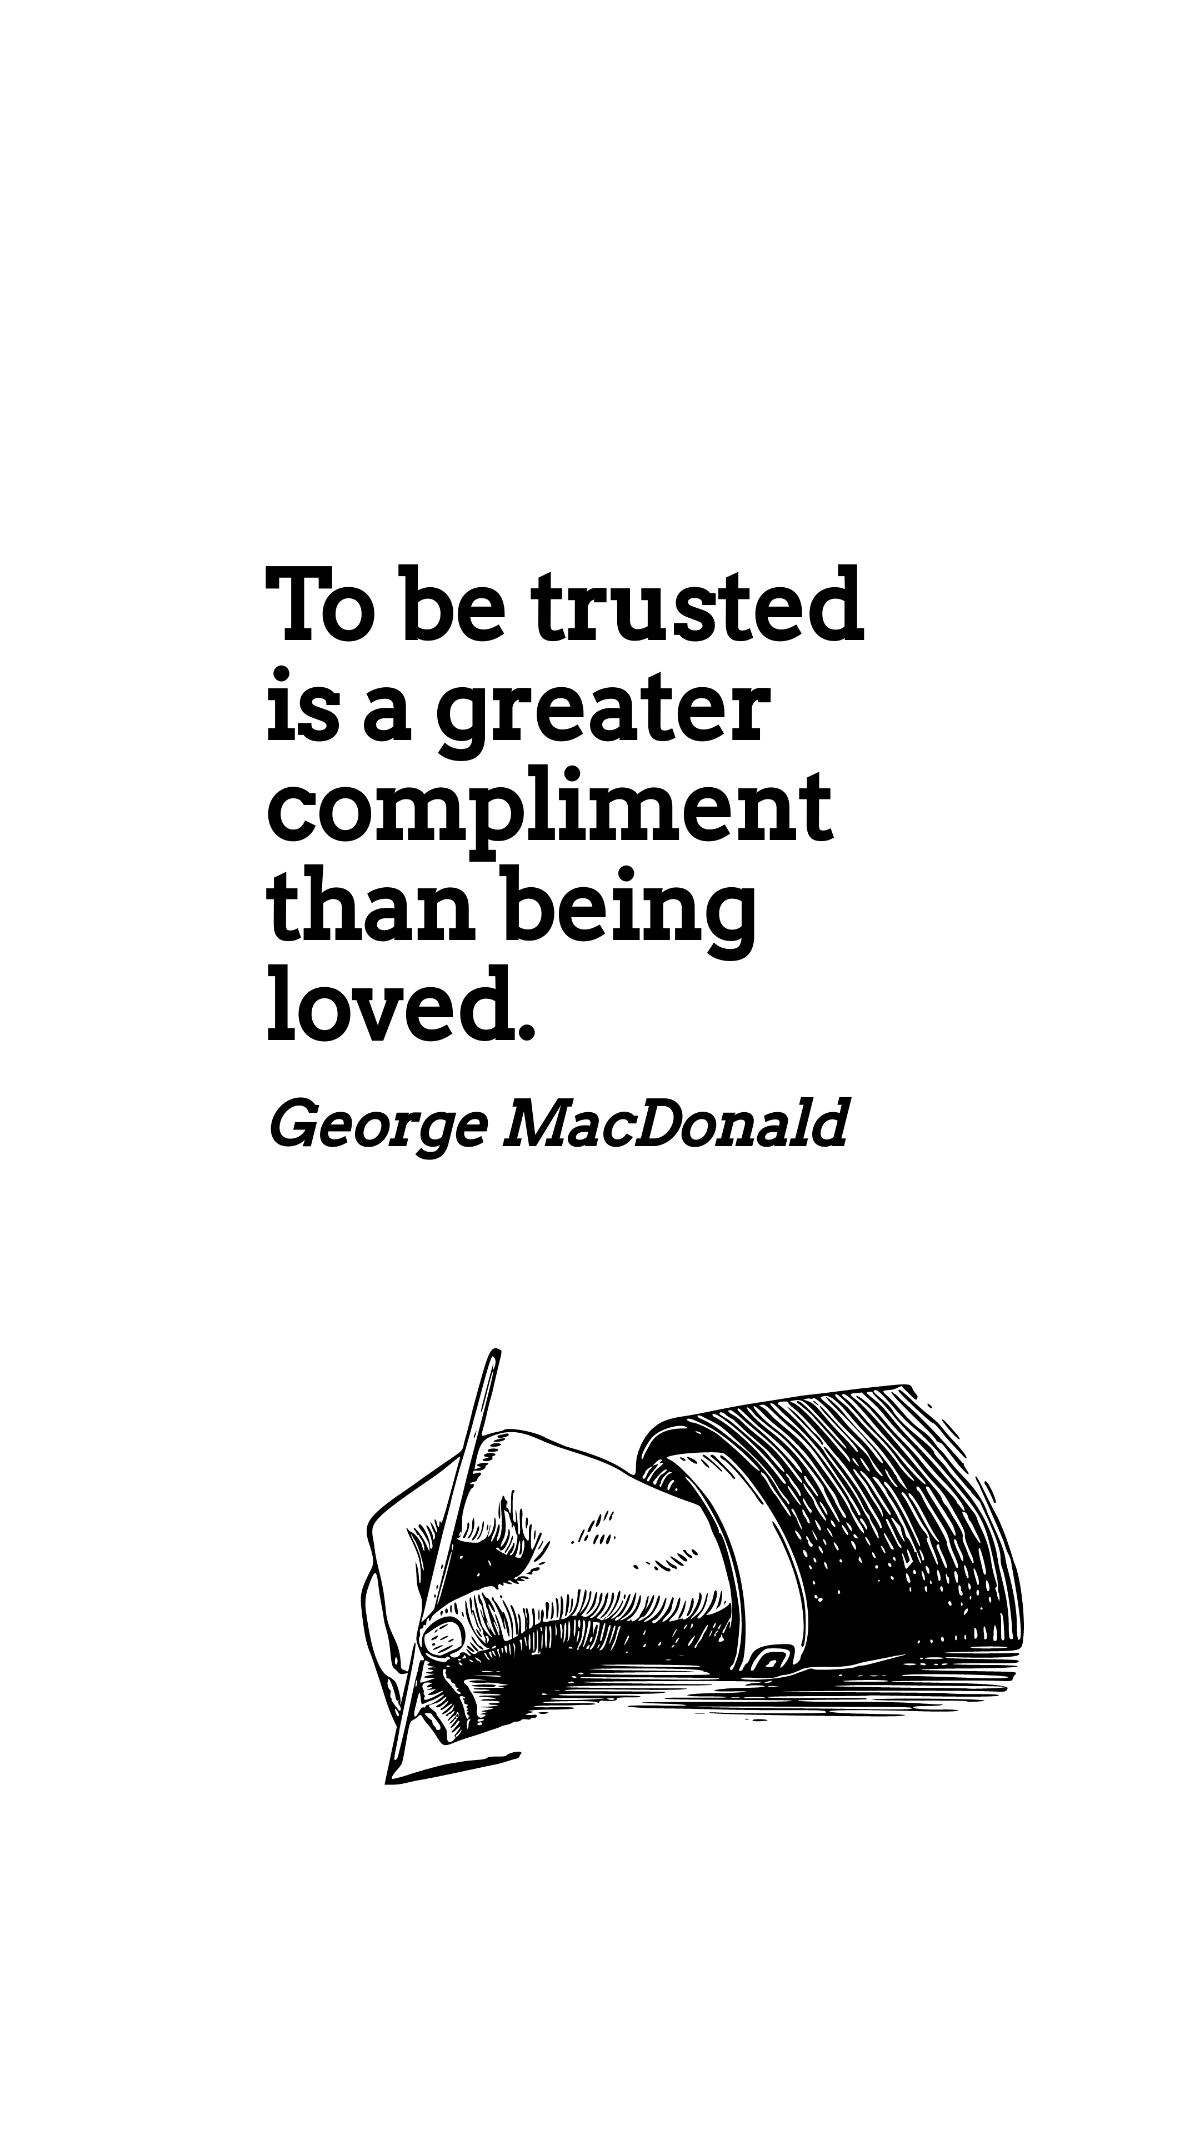 George MacDonald - To be trusted is a greater compliment than being loved. Template